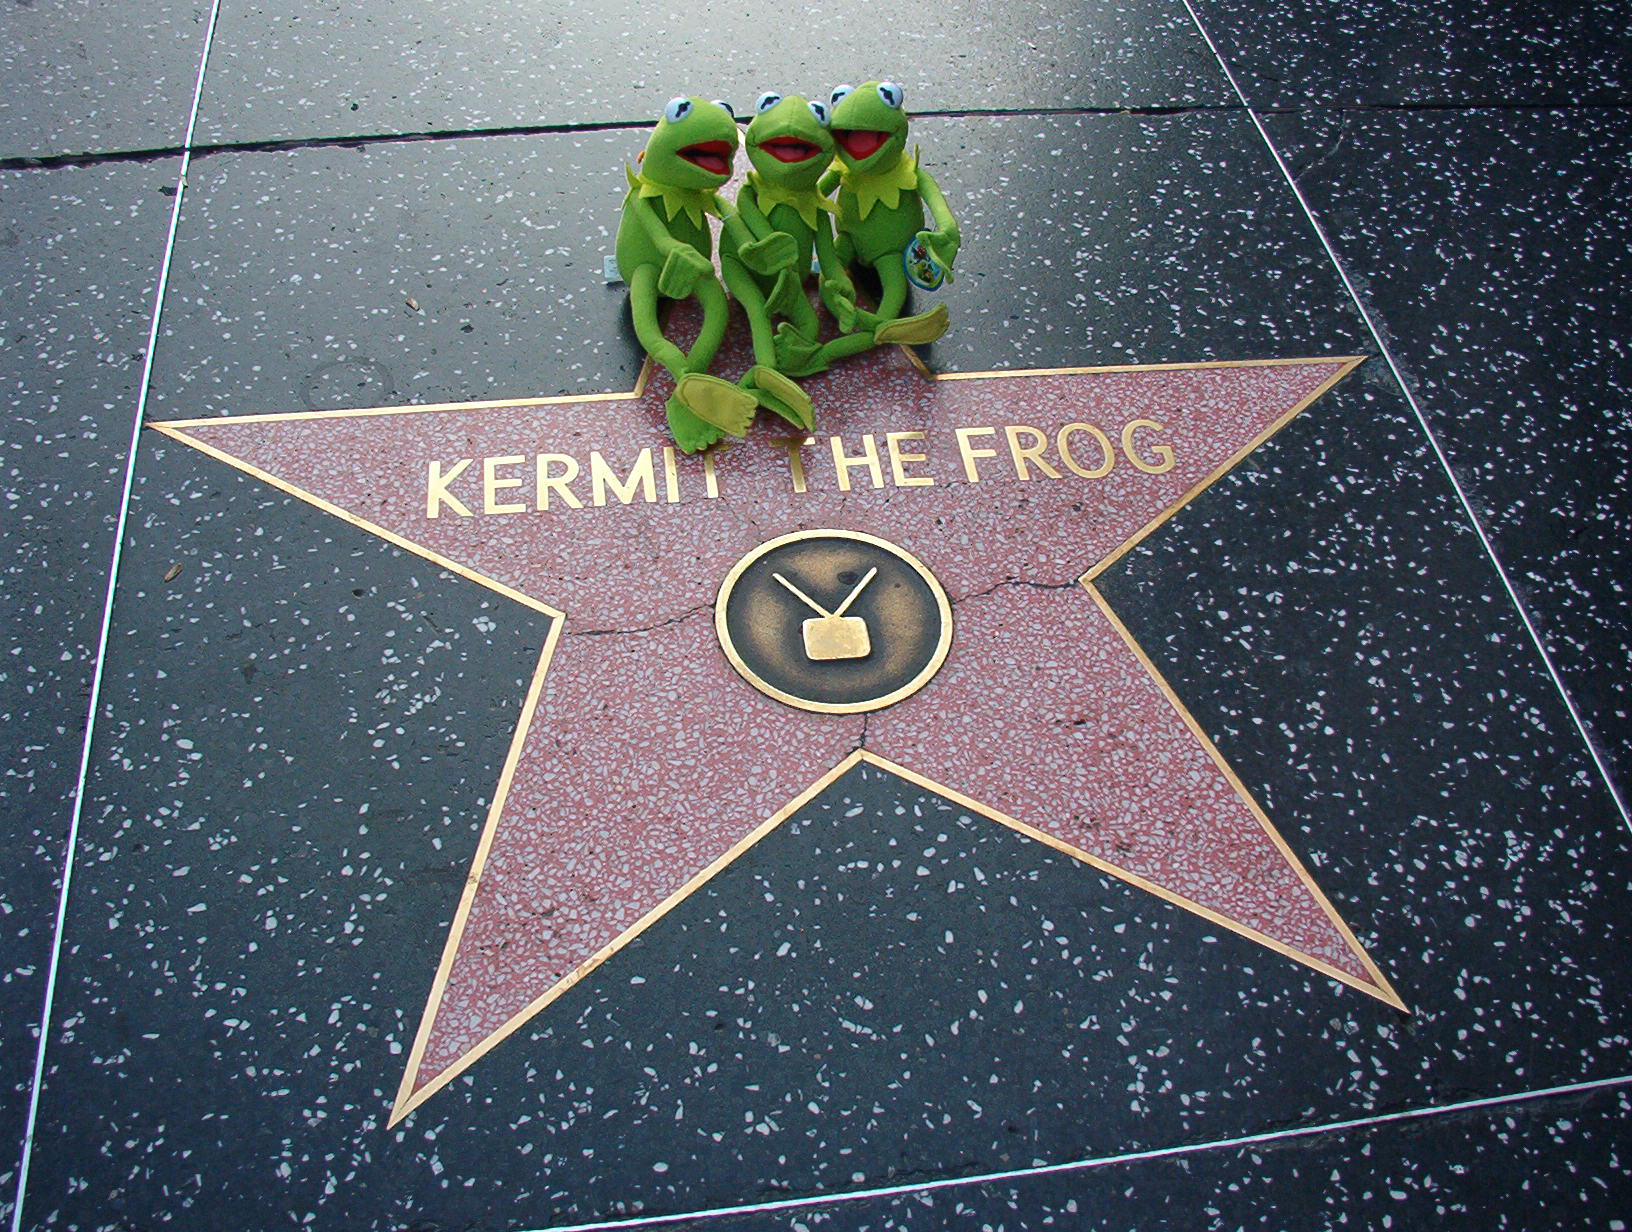 kermi the frog sitting on a star with other kermi the frog